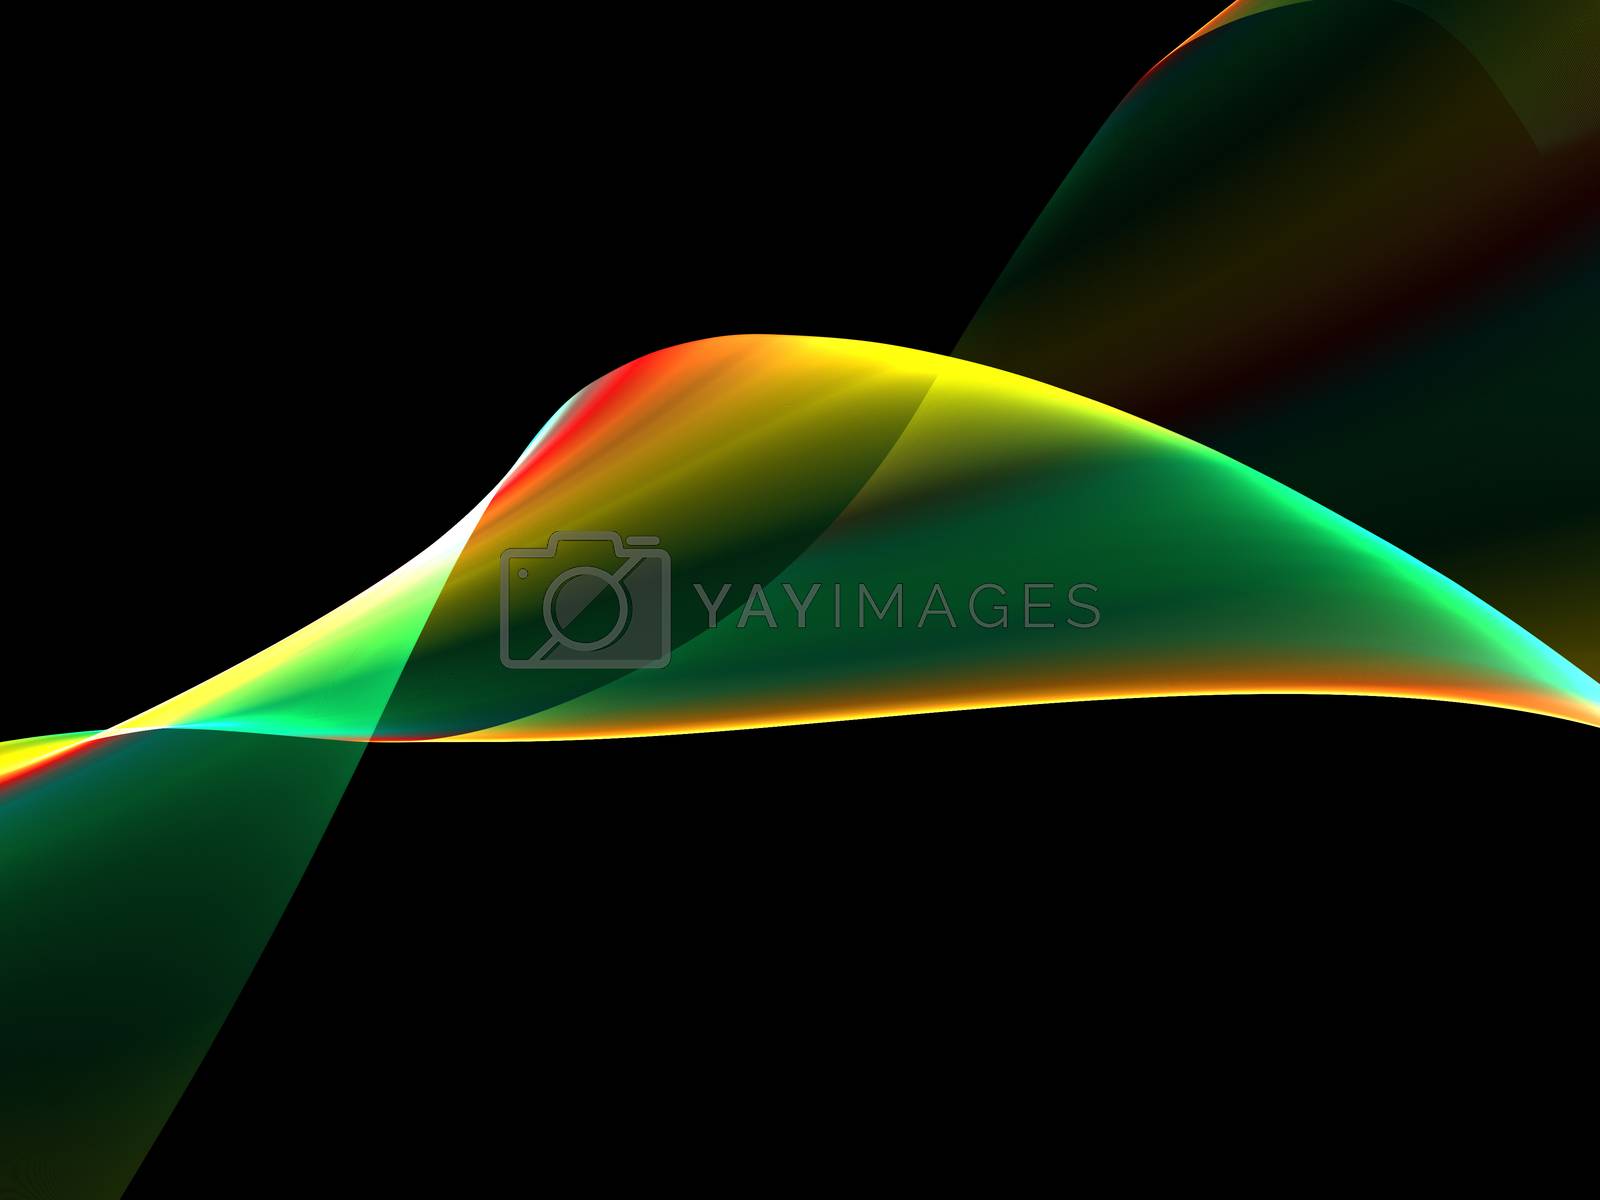 Royalty free image of Dark abstract background with a glowing abstract waves by teerawit